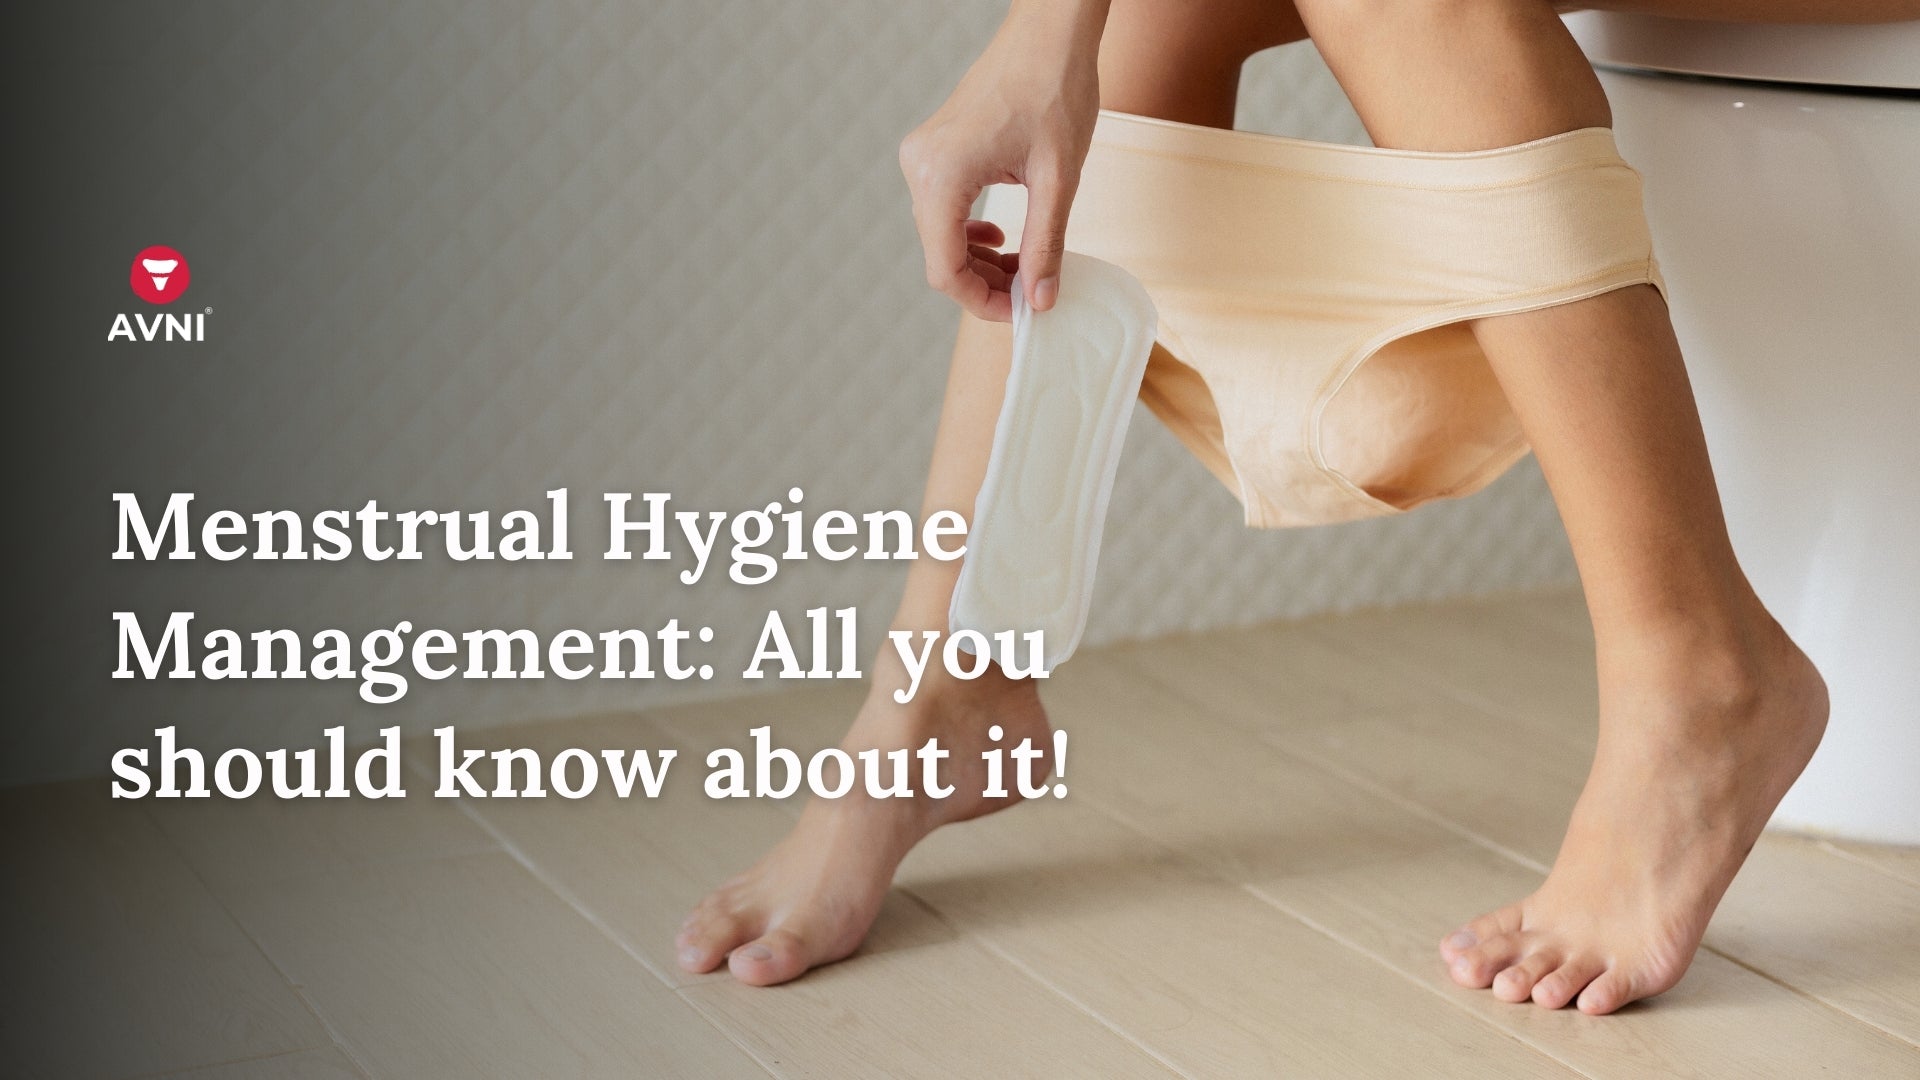 Menstrual Hygiene Management: All you should know about it!